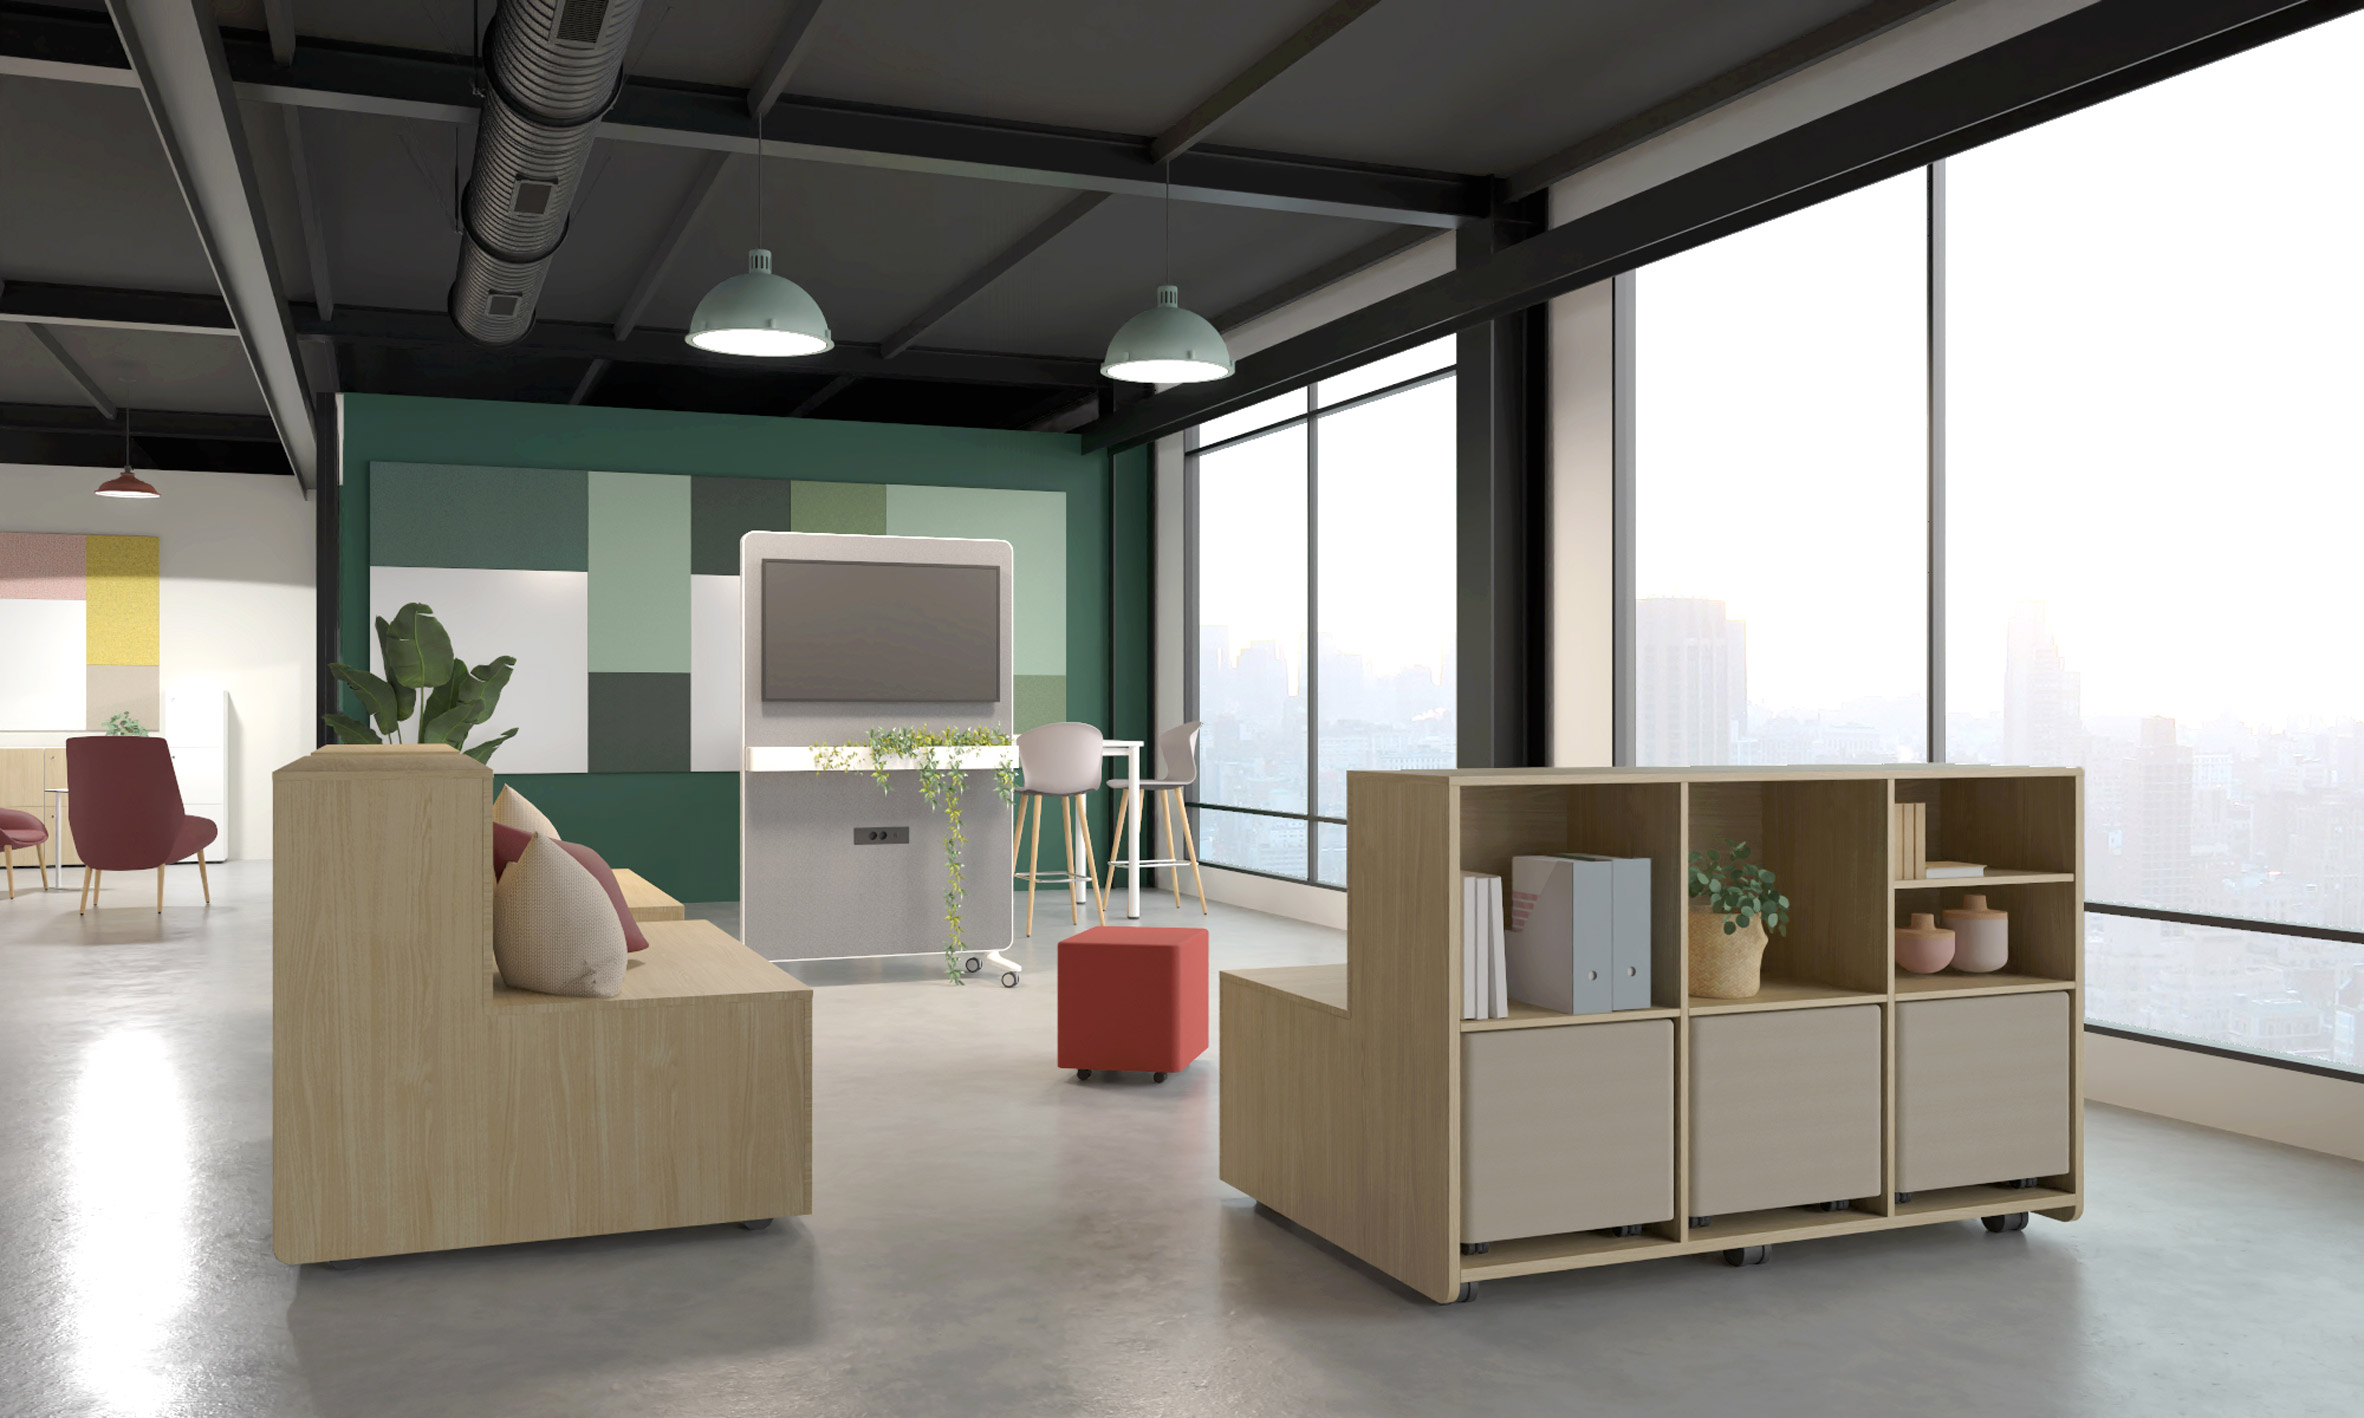 Actiu designed the furniture to be mobile